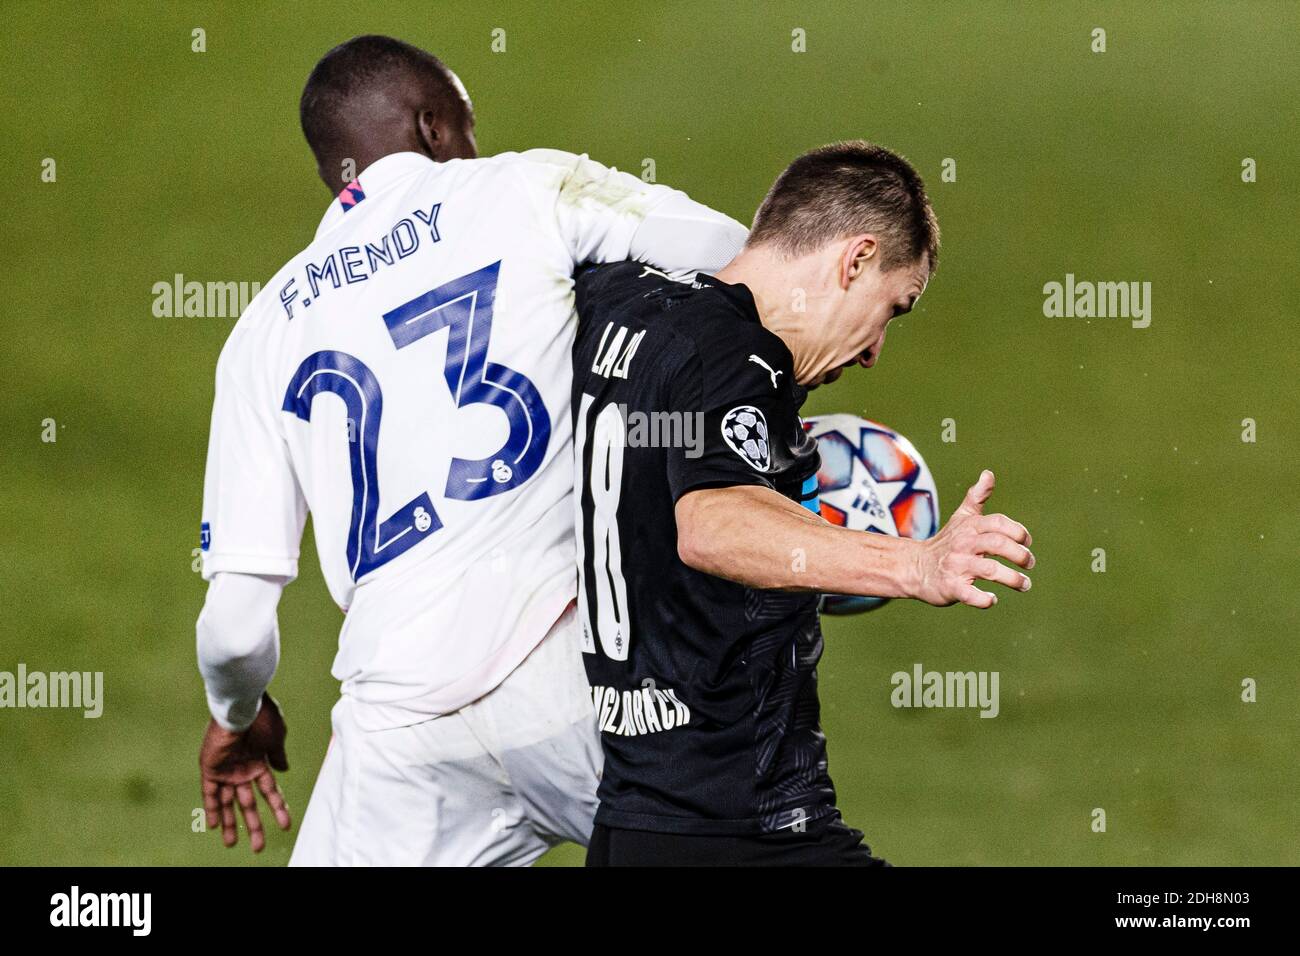 Madrid, Spain. 9th Dec, 2020. Ferland Mendy of Real Madrid (L) battles for the ball with Stefan Lainer of Monchengladbach (R) during the UEFA Champion Stock Photo